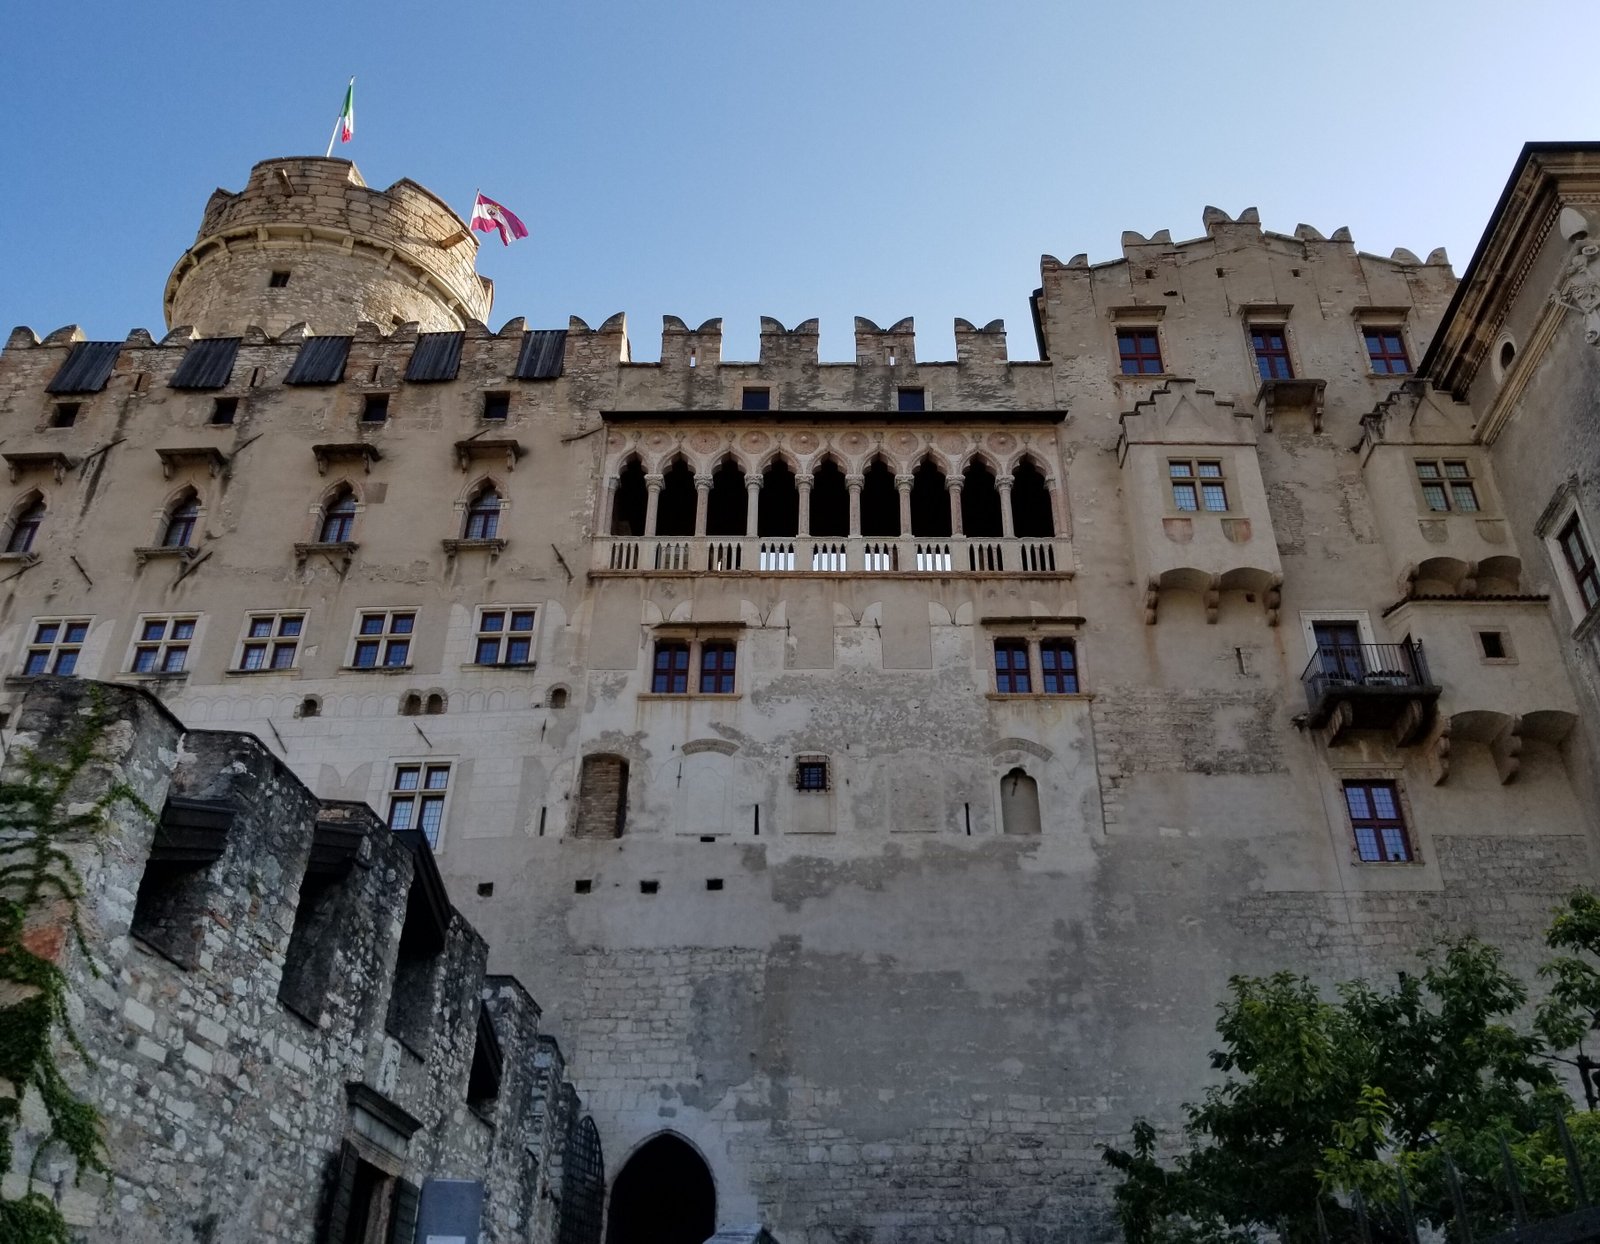 Months 9 & 10 for our 1-year adventure in Italy. New towns explored. https://ouritalianjourney.com/months-9-10-1-year-adventure-in-italy, Trento